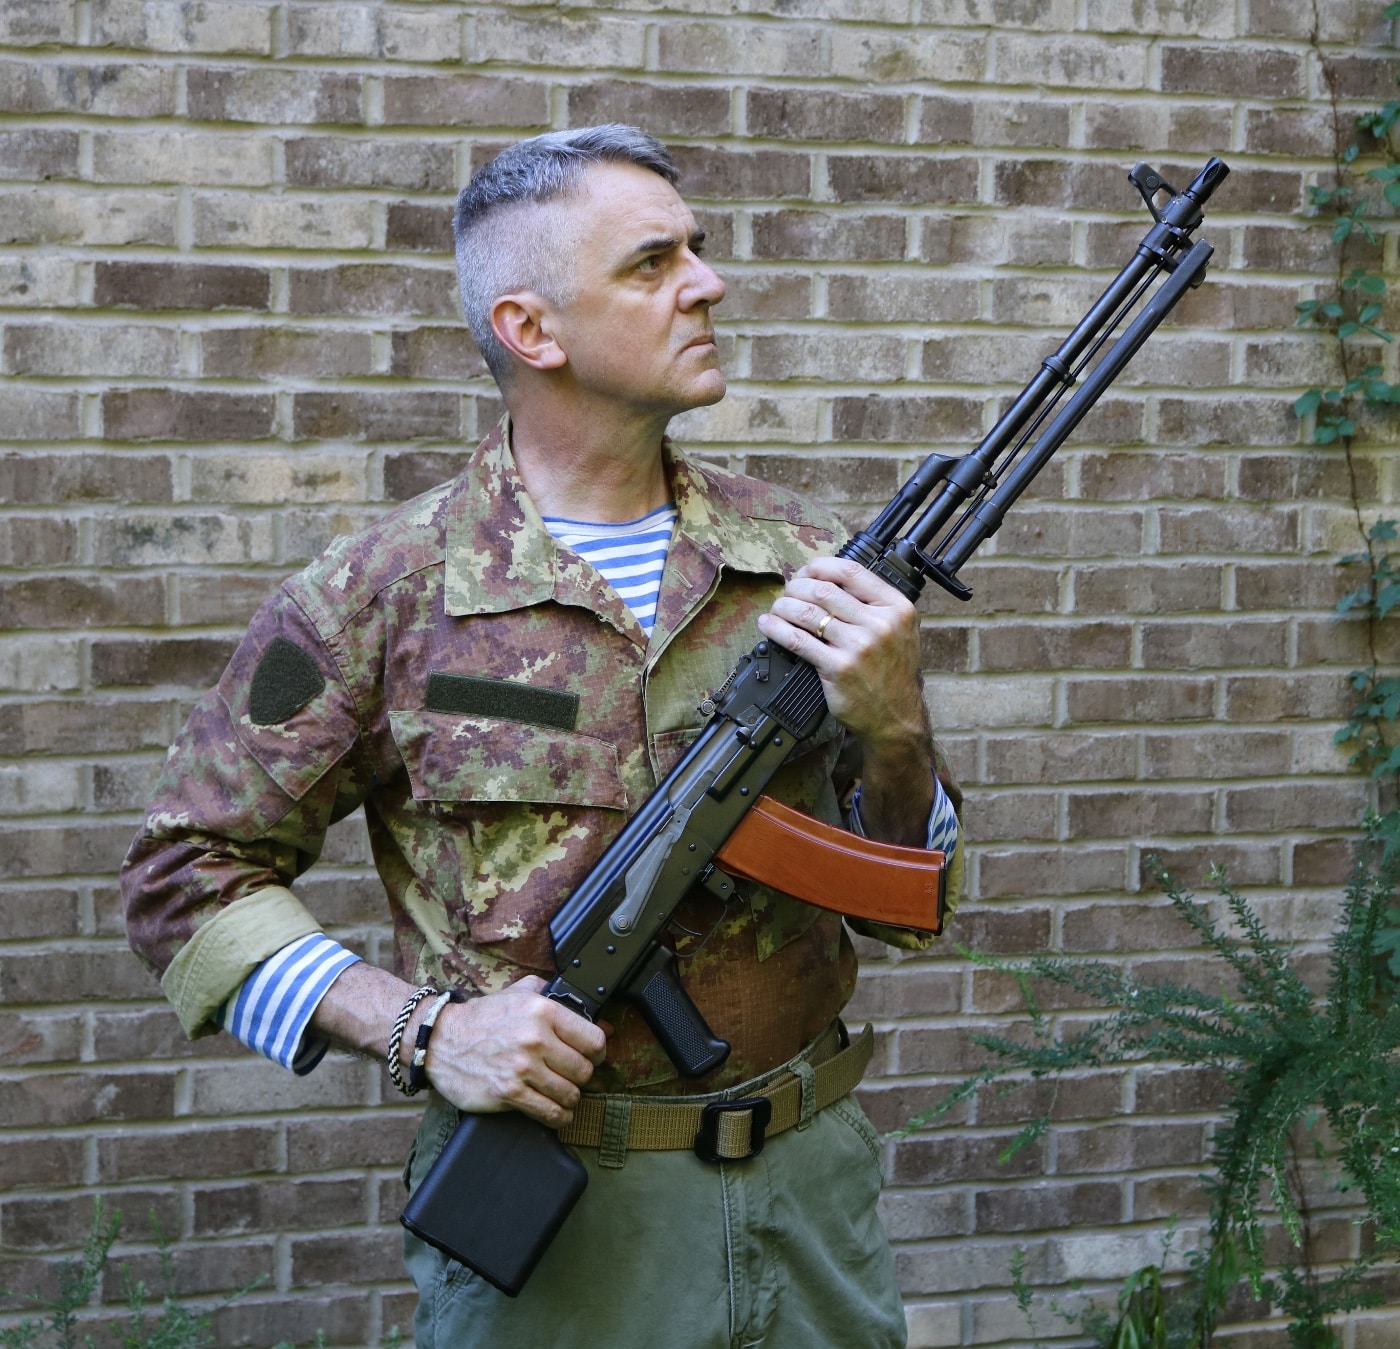 author with RPK-74 LMG